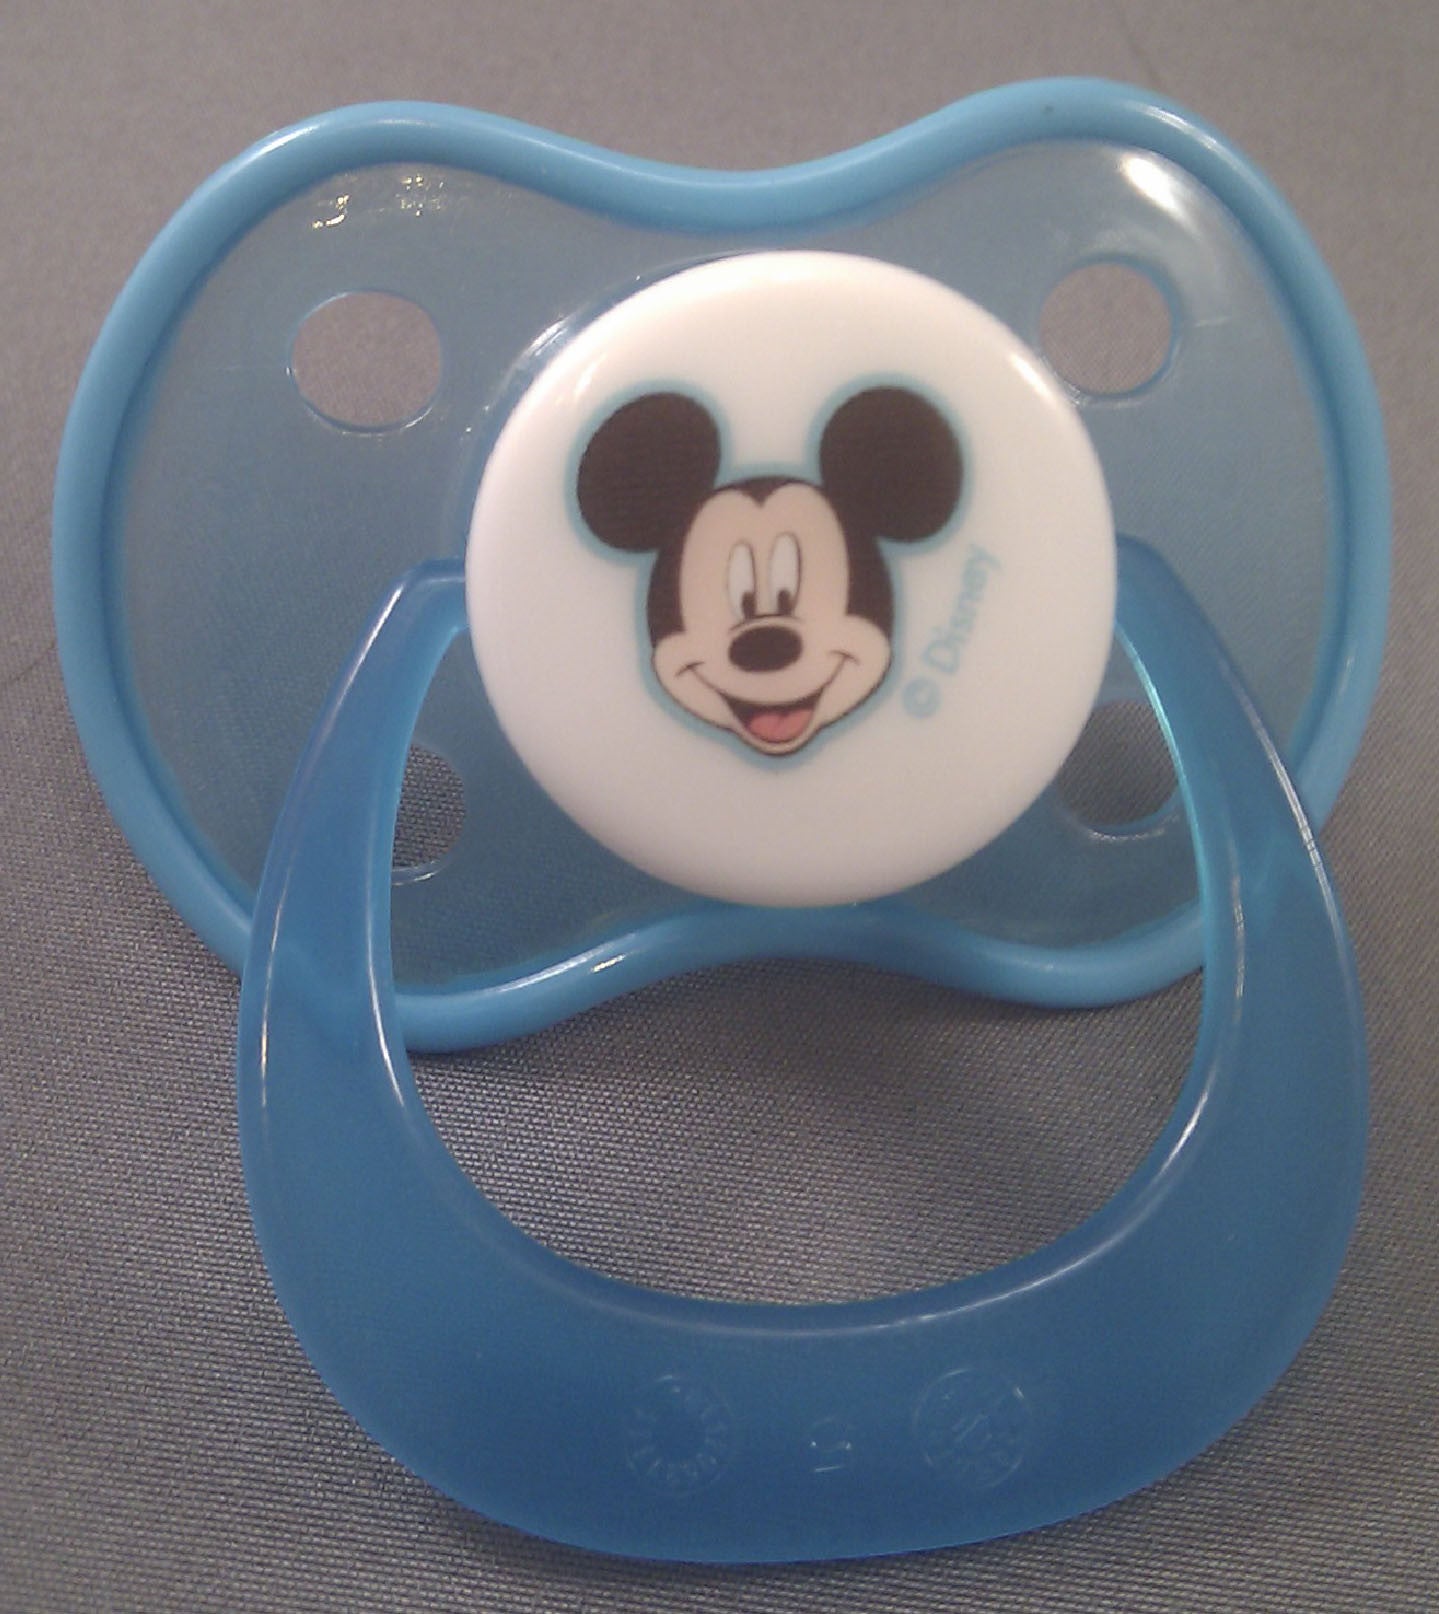 Micky and Minnie Mouse Pacifiers